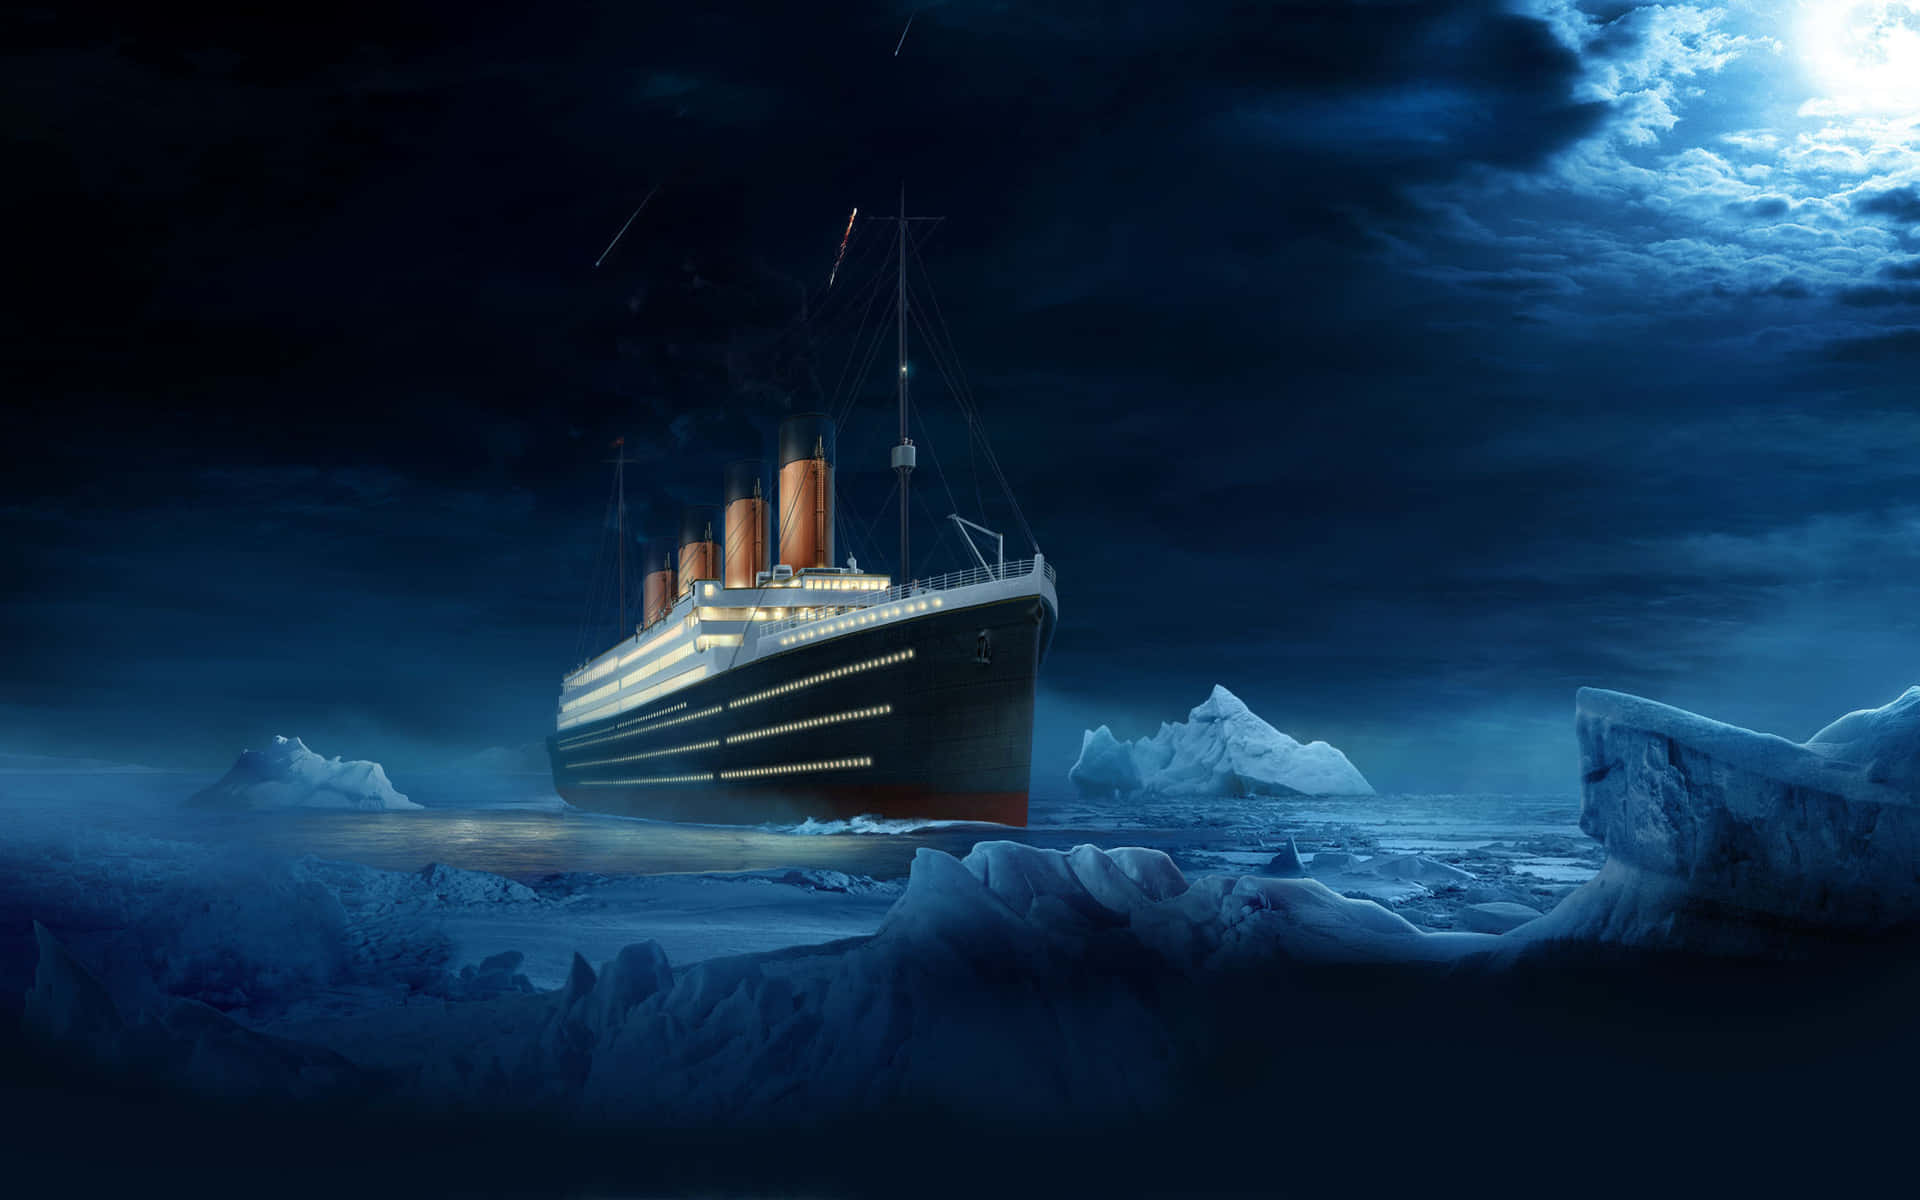 View of the Sinking Titanic